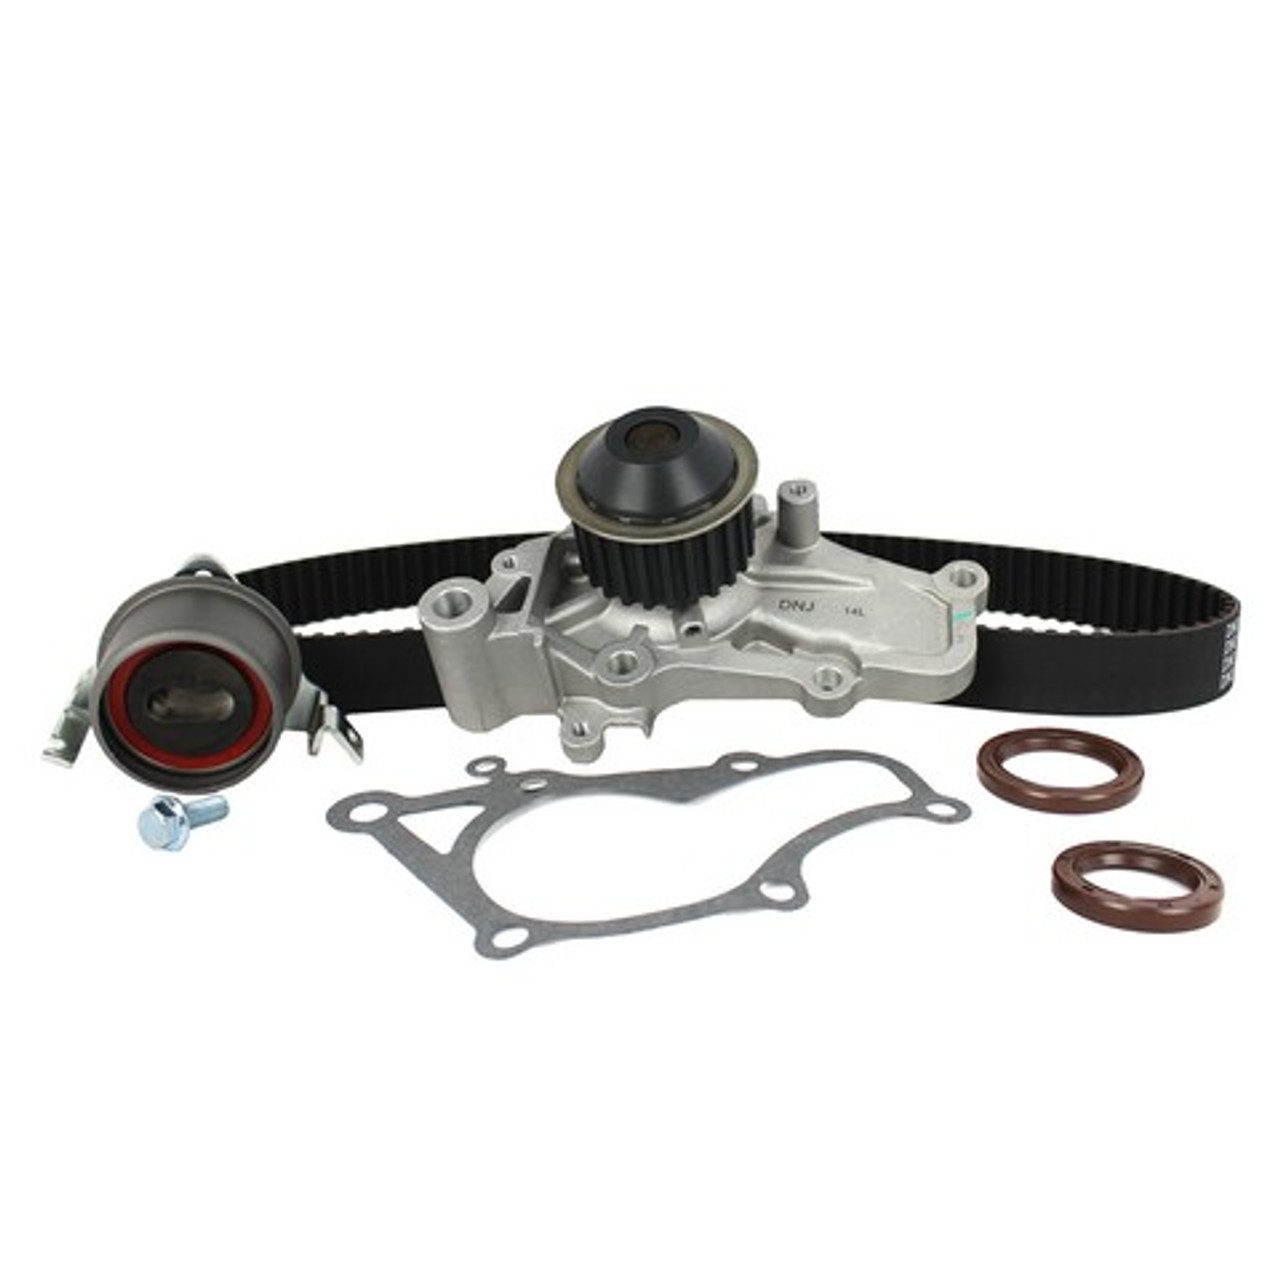 1996 Eagle Summit 1.8L Timing Belt Kit with Water Pump TBK119WP.E5